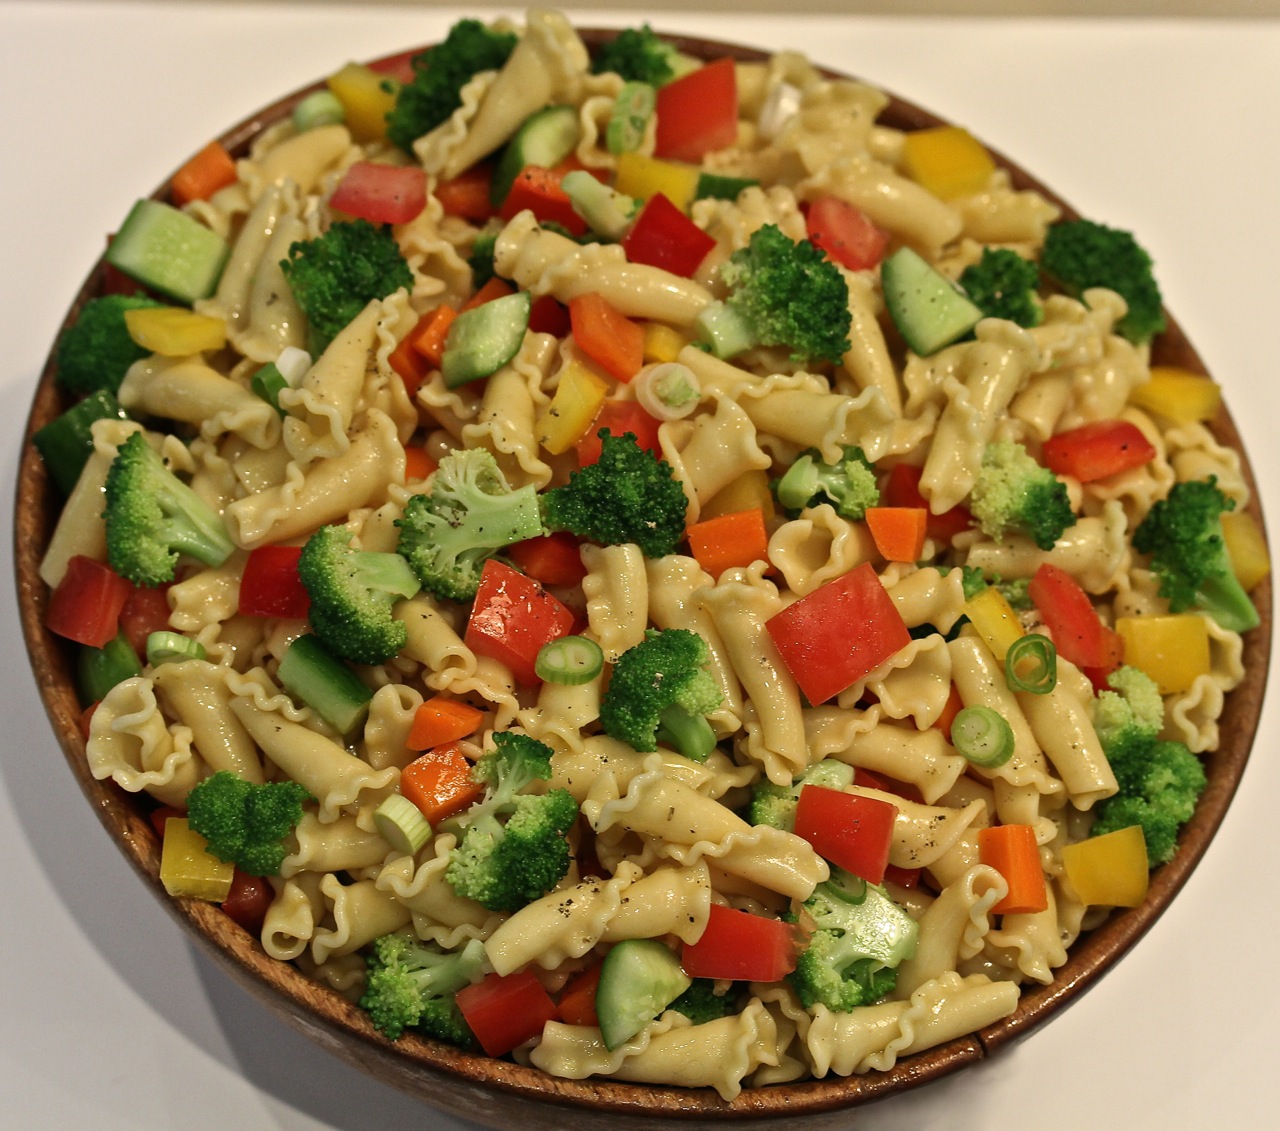 Pasta and Raw Vegetable Salad - America's Table